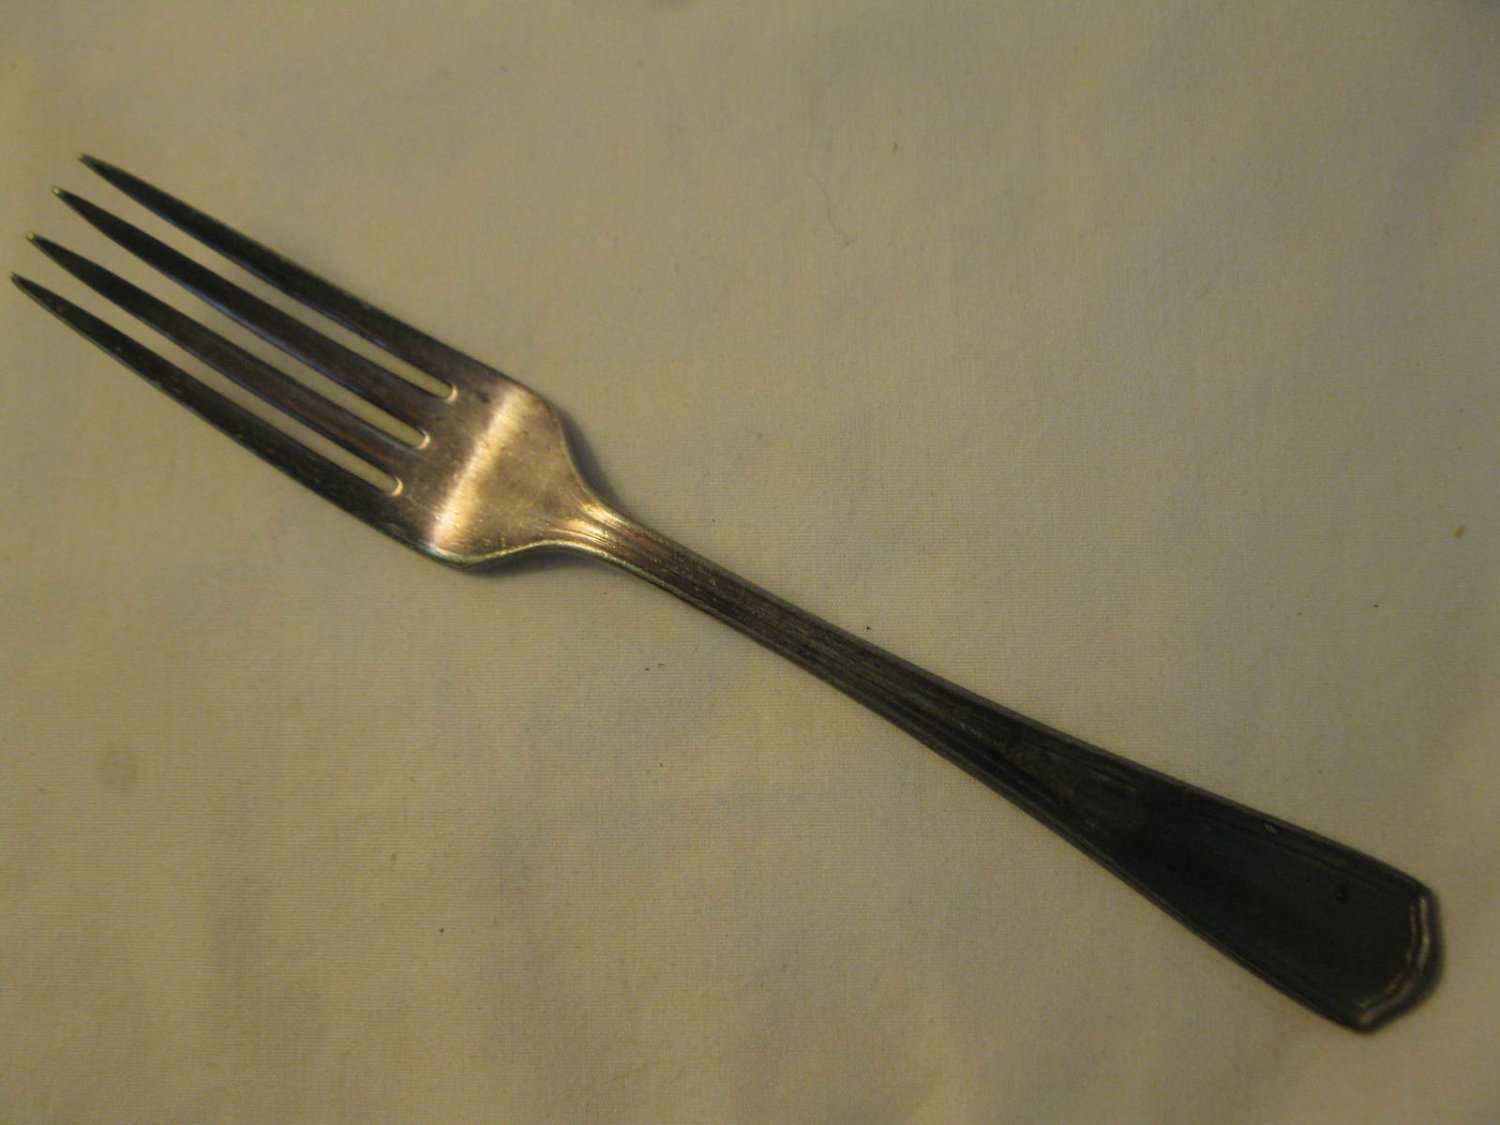 Oneida Hotel Plate 1913 Exeter? Pattern Silver Plated 7" Table Fork - Hotel Peabody